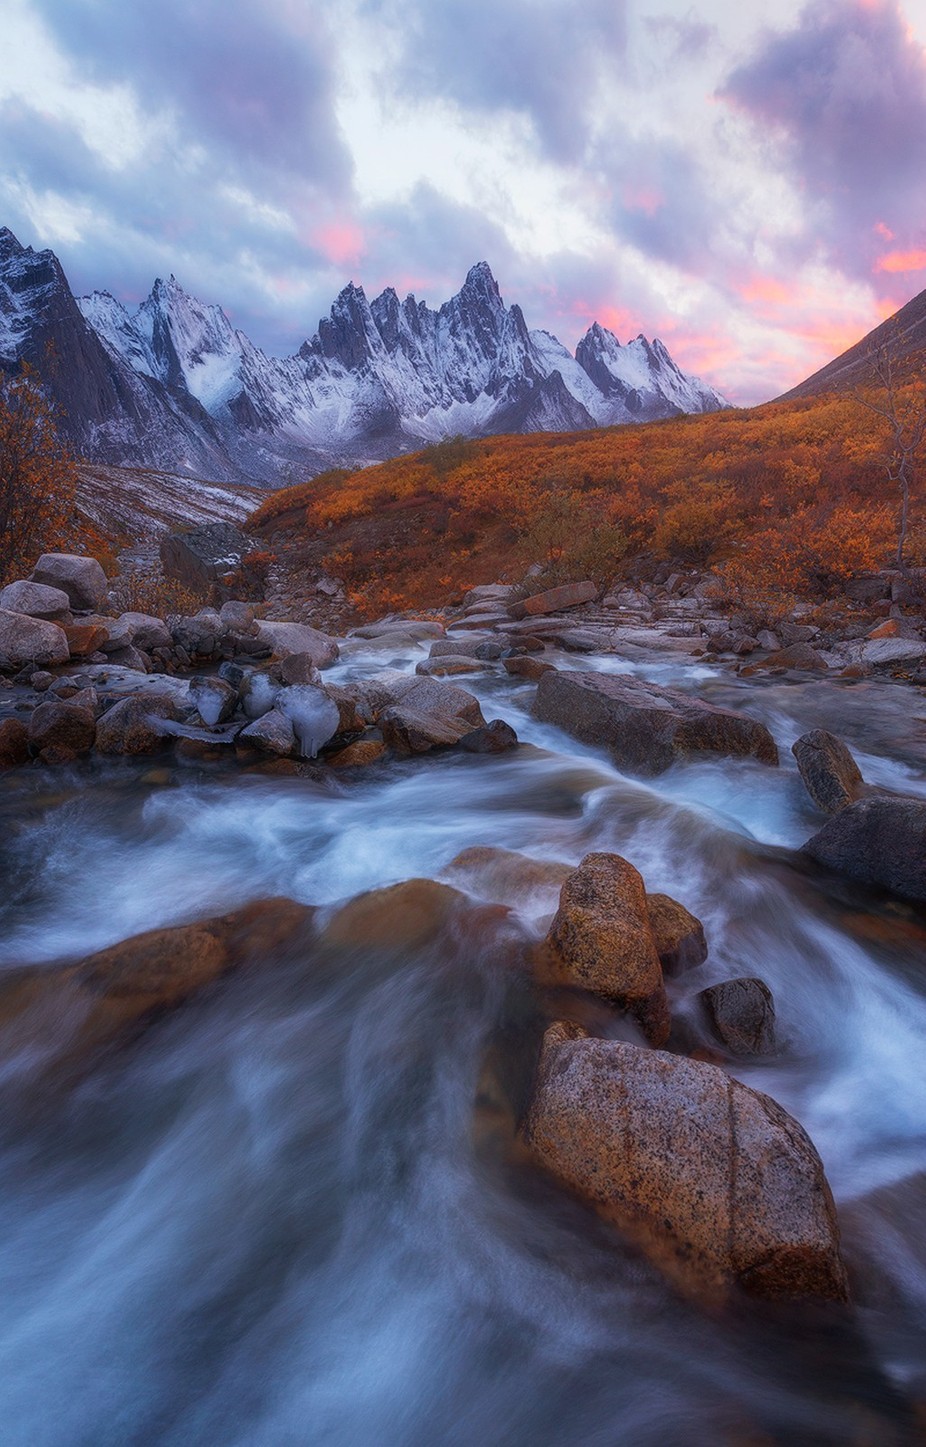 Patagonia of North America by terenceleezy - The First Light Photo Contest